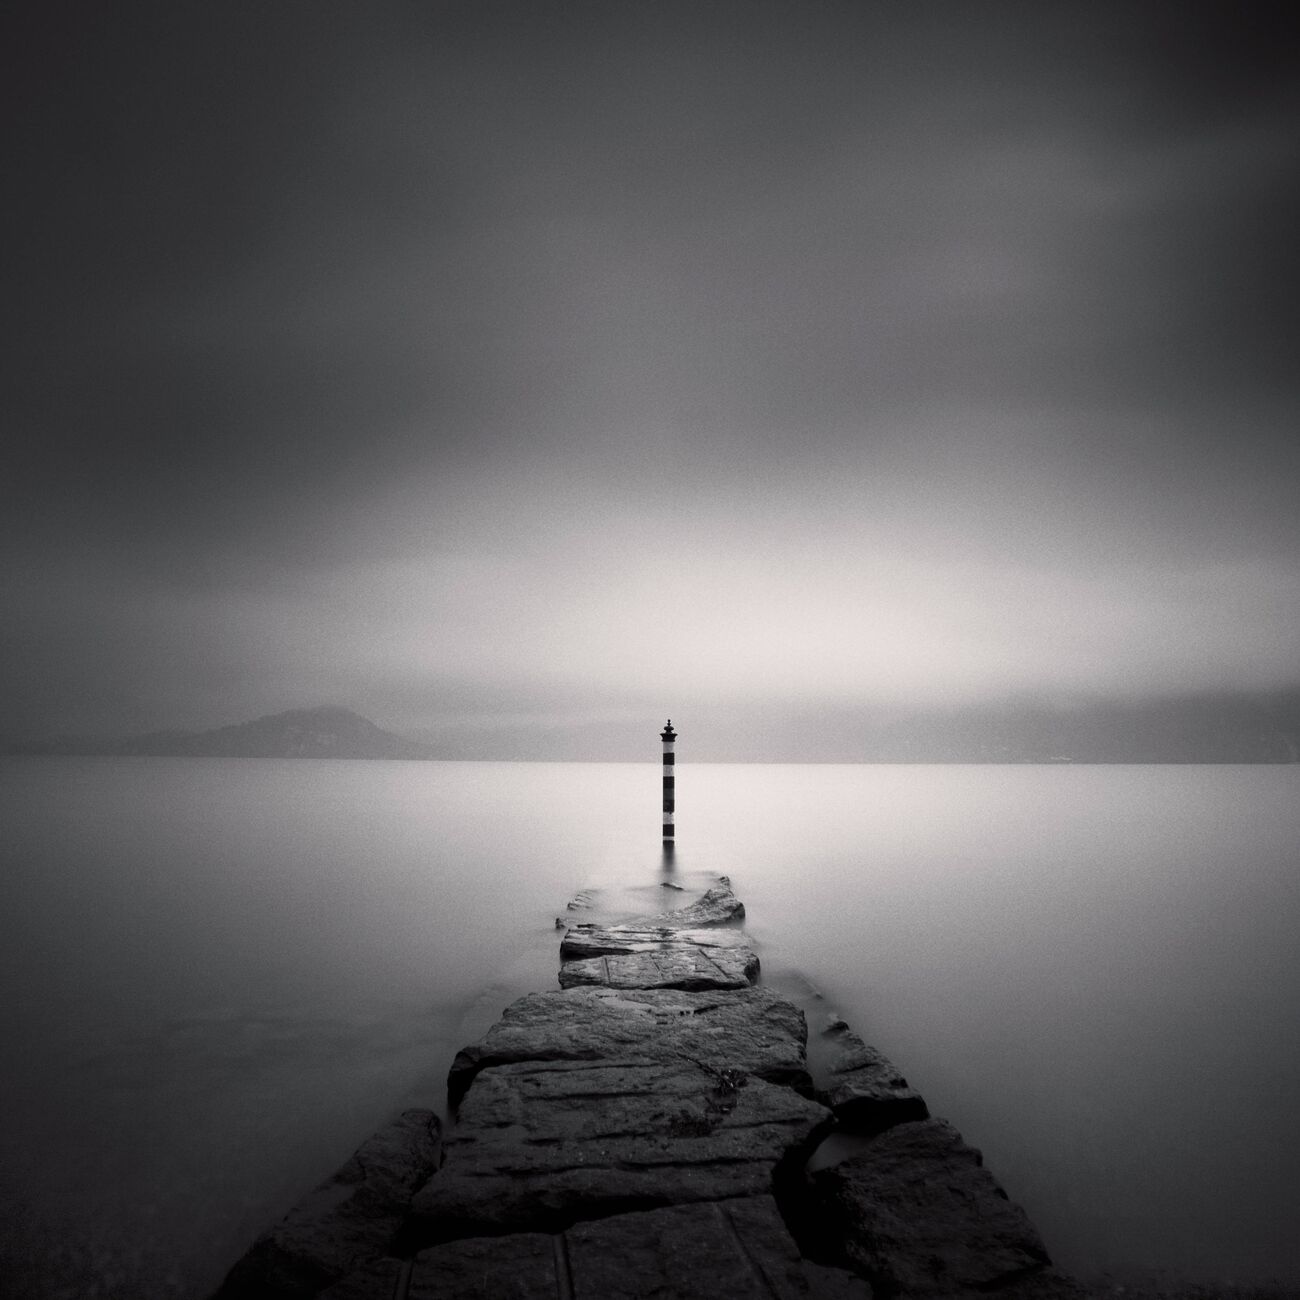 Striped Pole, Study 1, Lake Maggiore, Switzerland. August 2014. Ref-11441 - Denis Olivier Photography